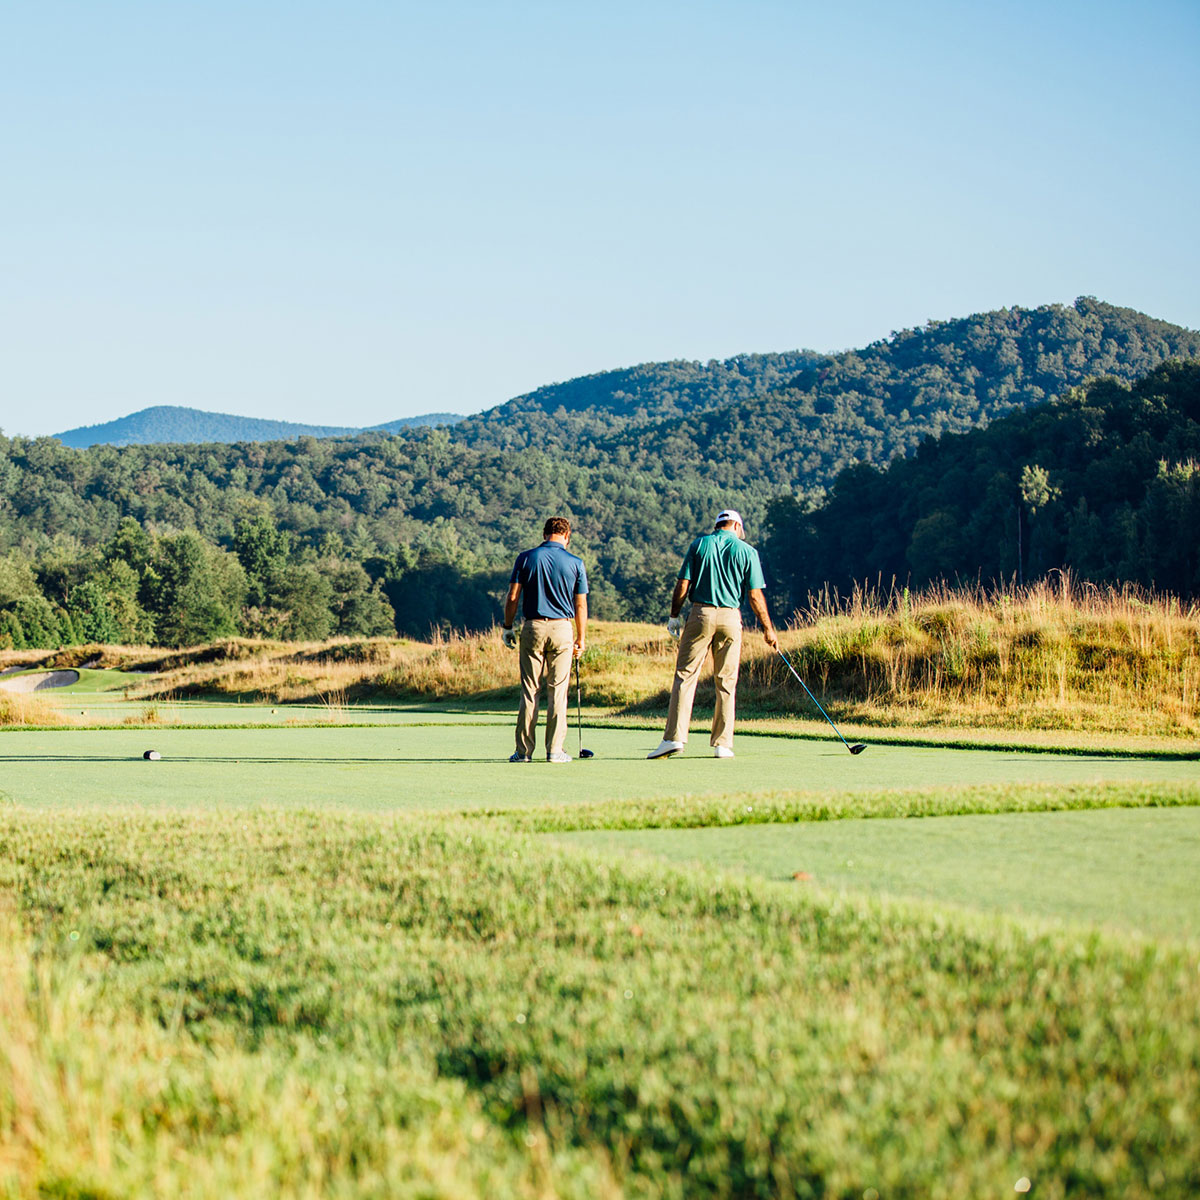 Golfers contemplate their shot on the green at The Cliffs Mountain Park's golf course